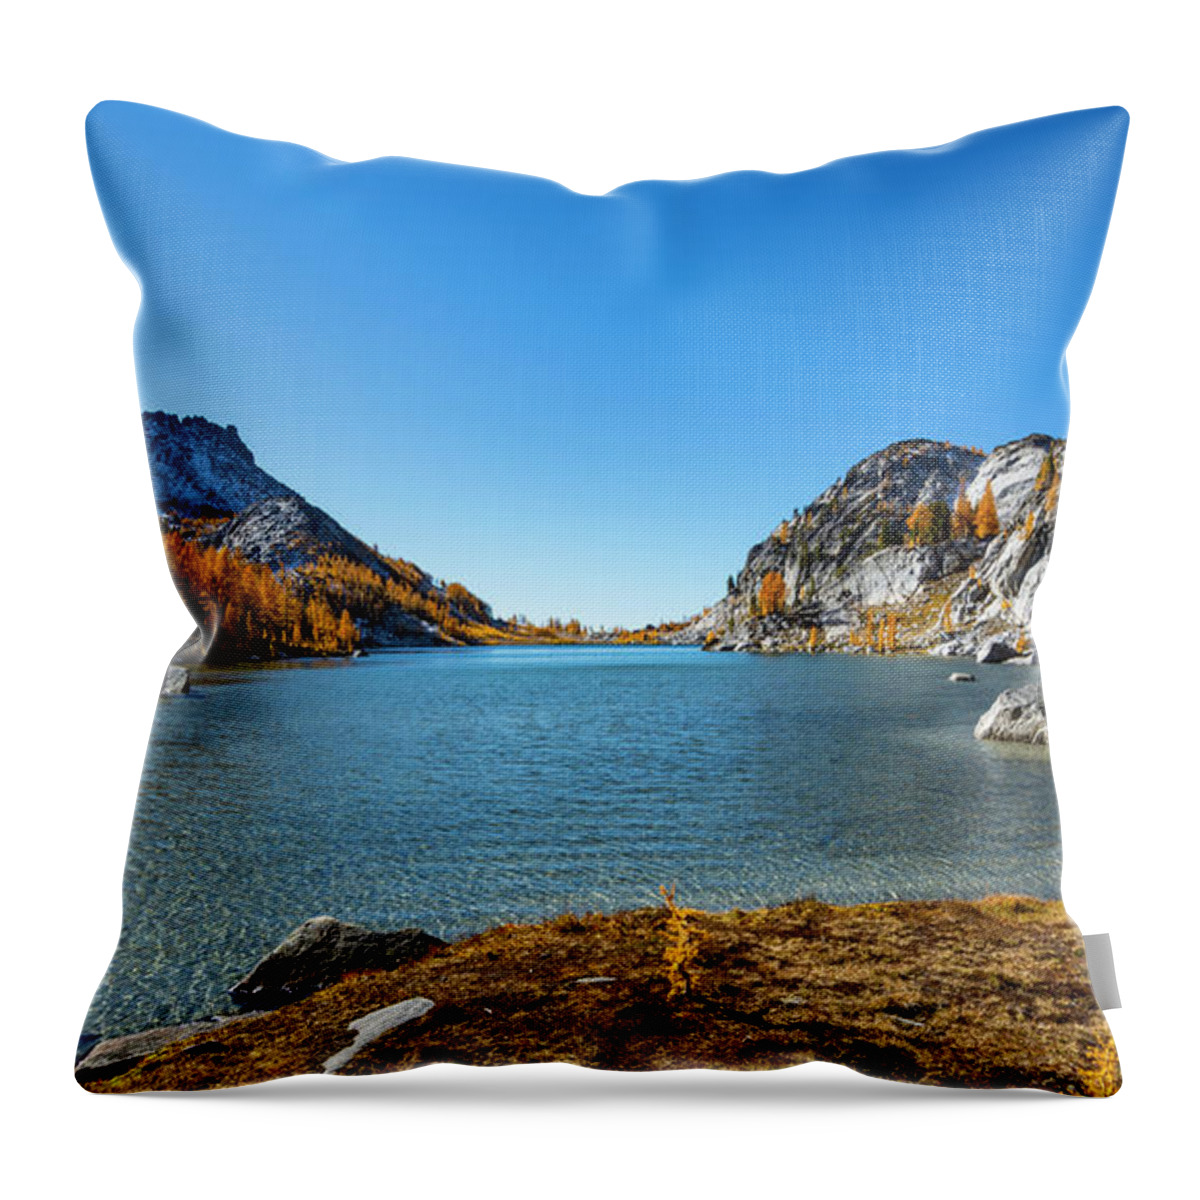 Core Throw Pillow featuring the photograph Perfection Lake 3 by Pelo Blanco Photo